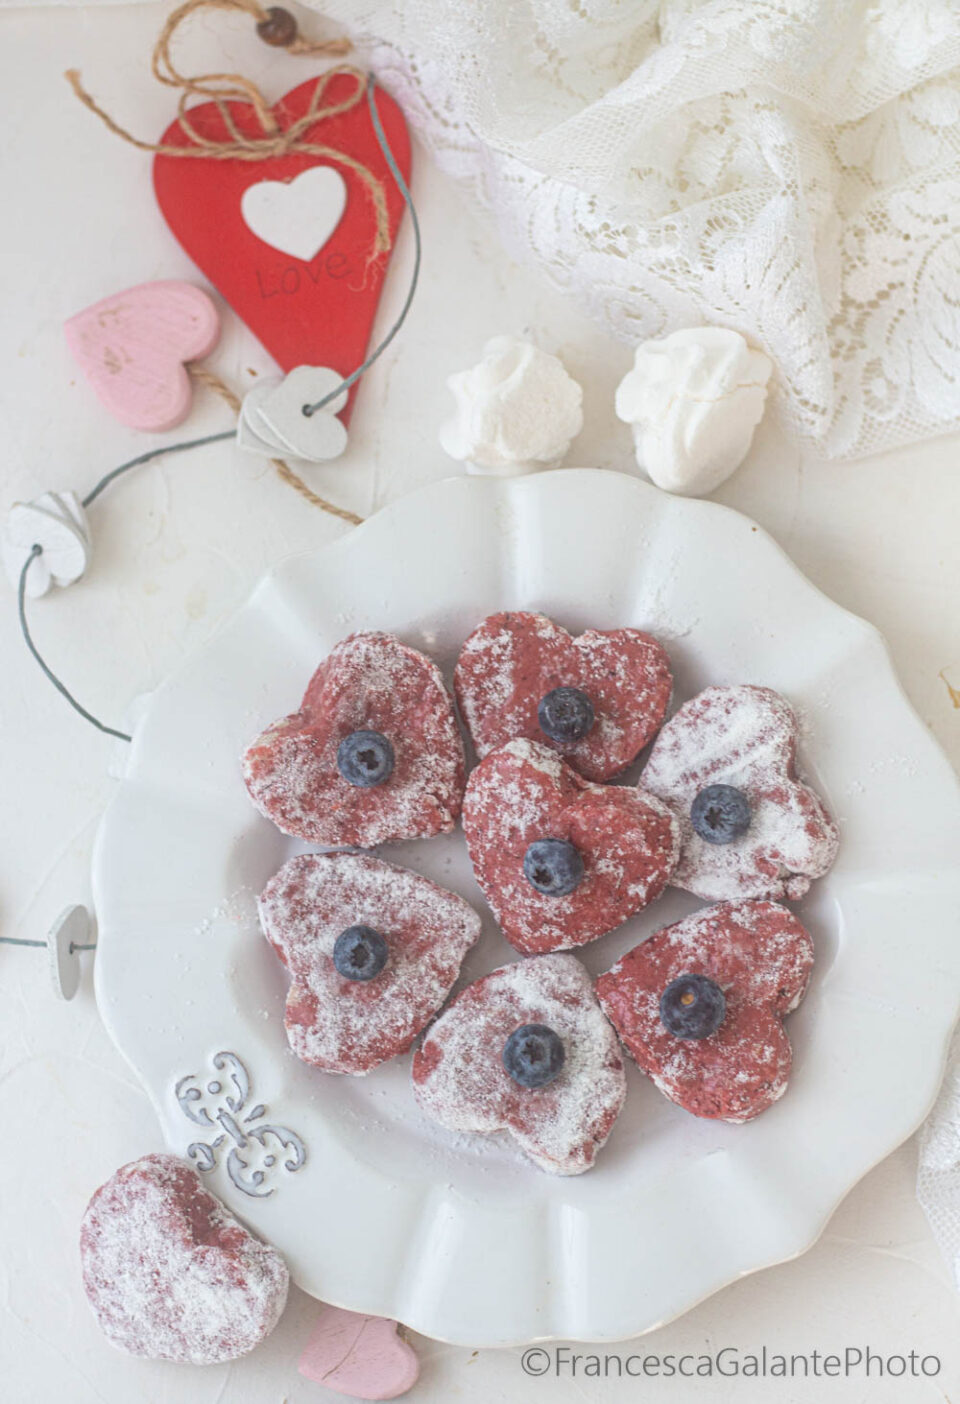 Blueberry soft heart without cooking